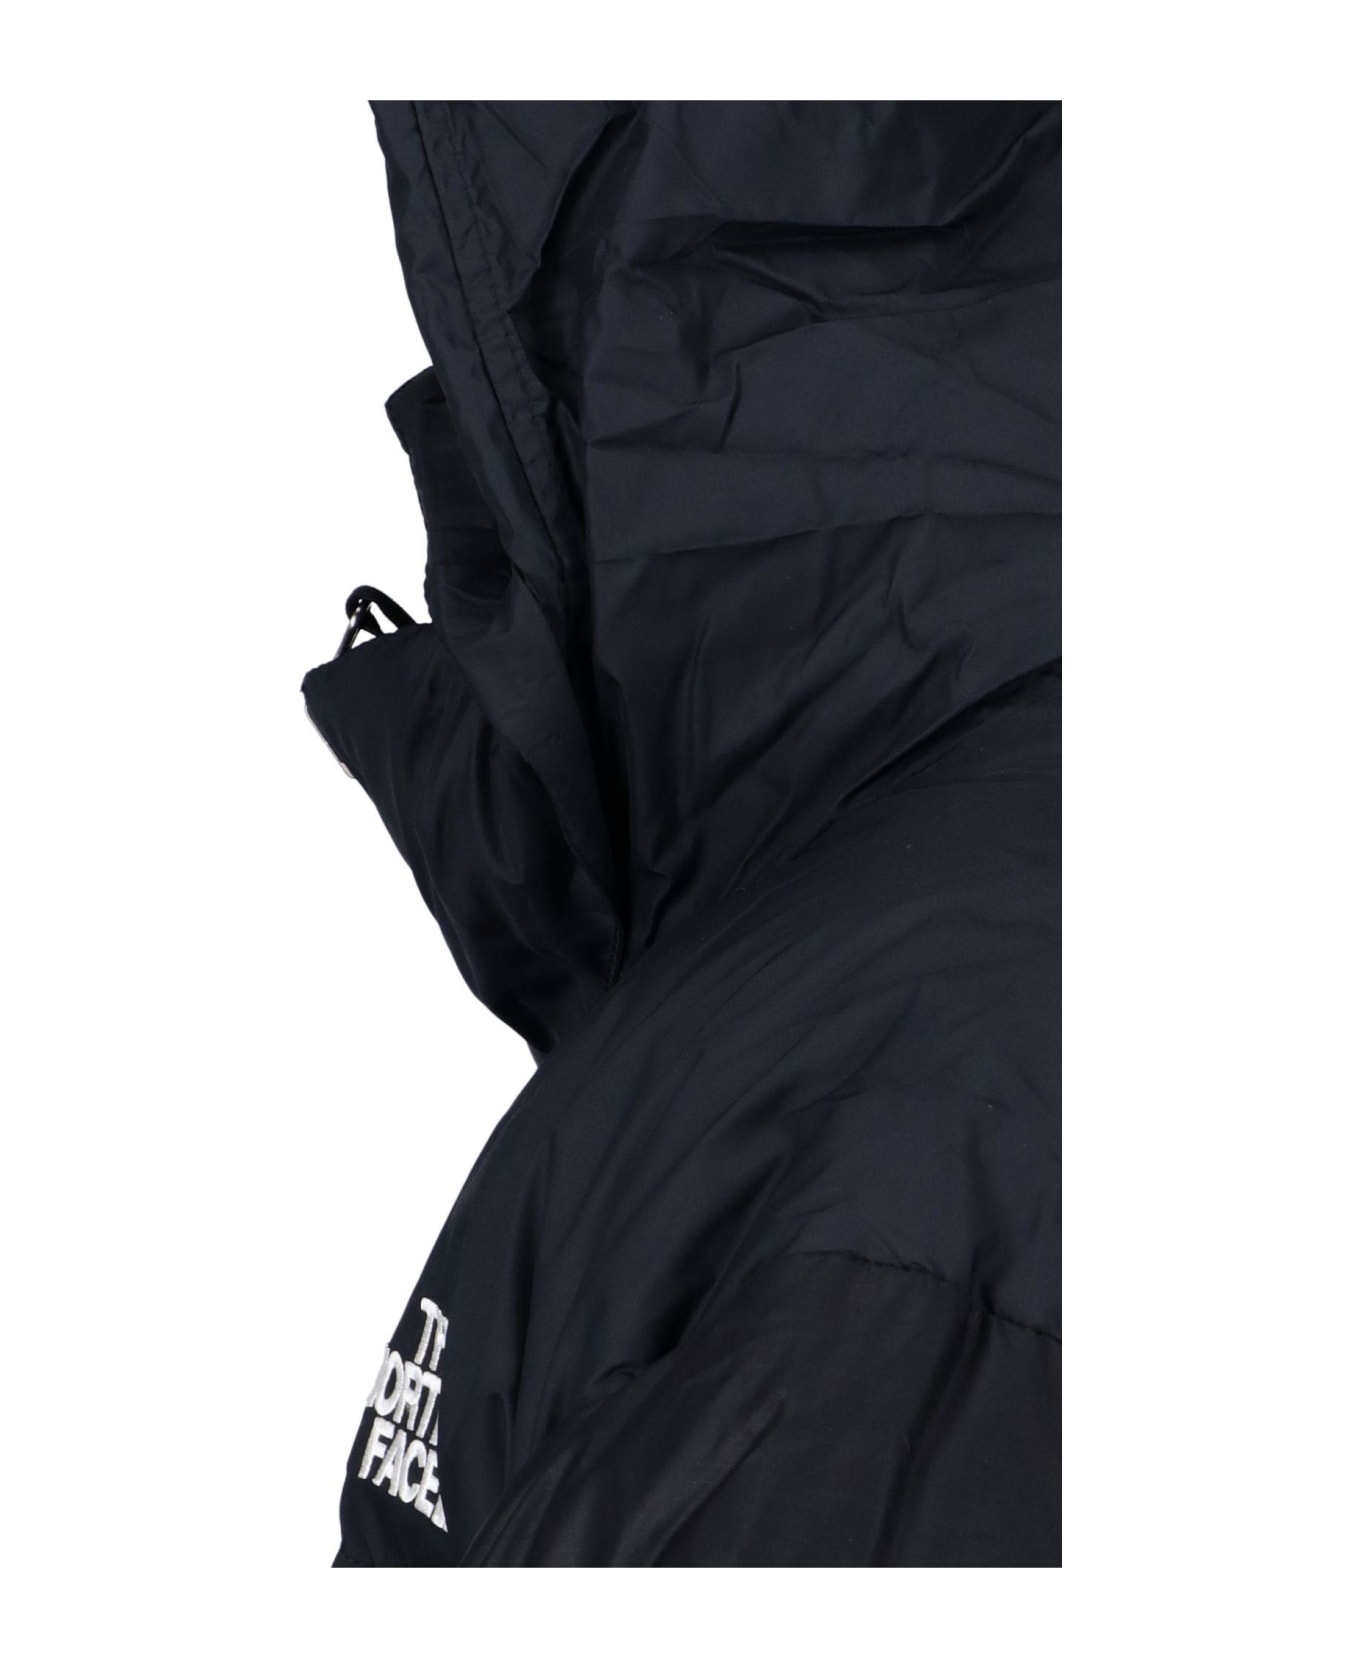 The North Face Logo Down Jacket - Black